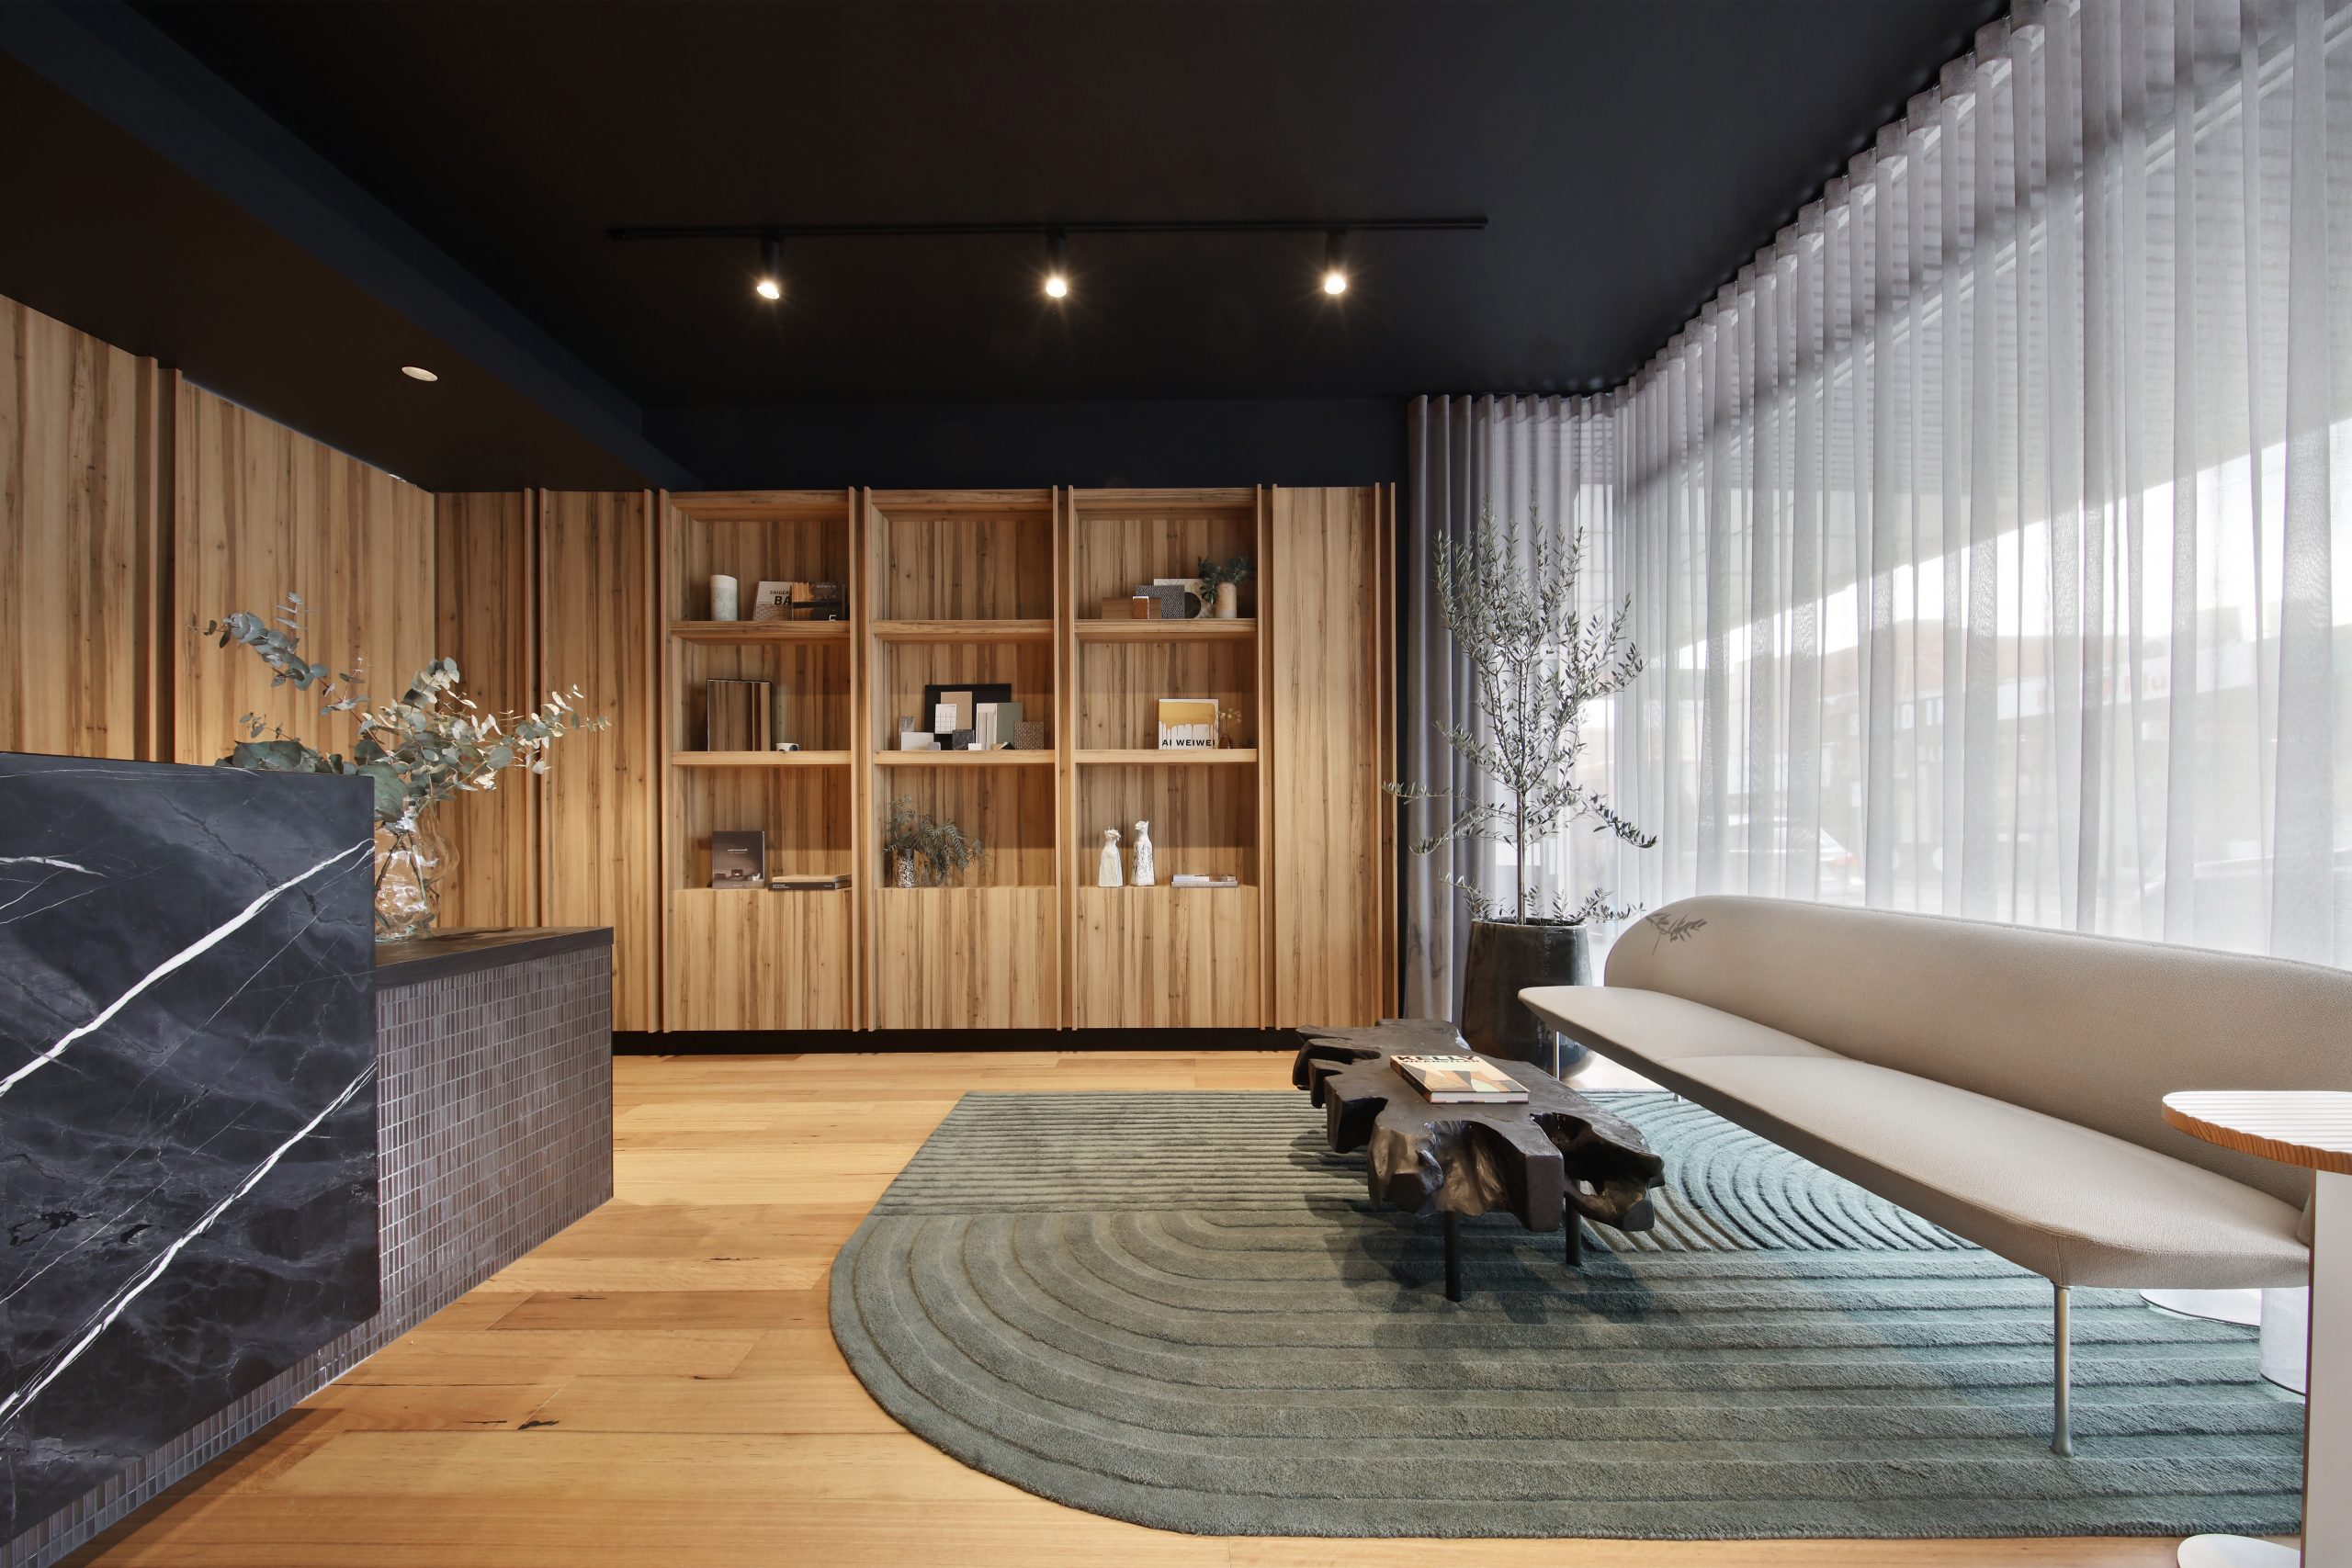 OBrien Bentleigh Redefines Real Estate Office Space with Innovative Design Concept